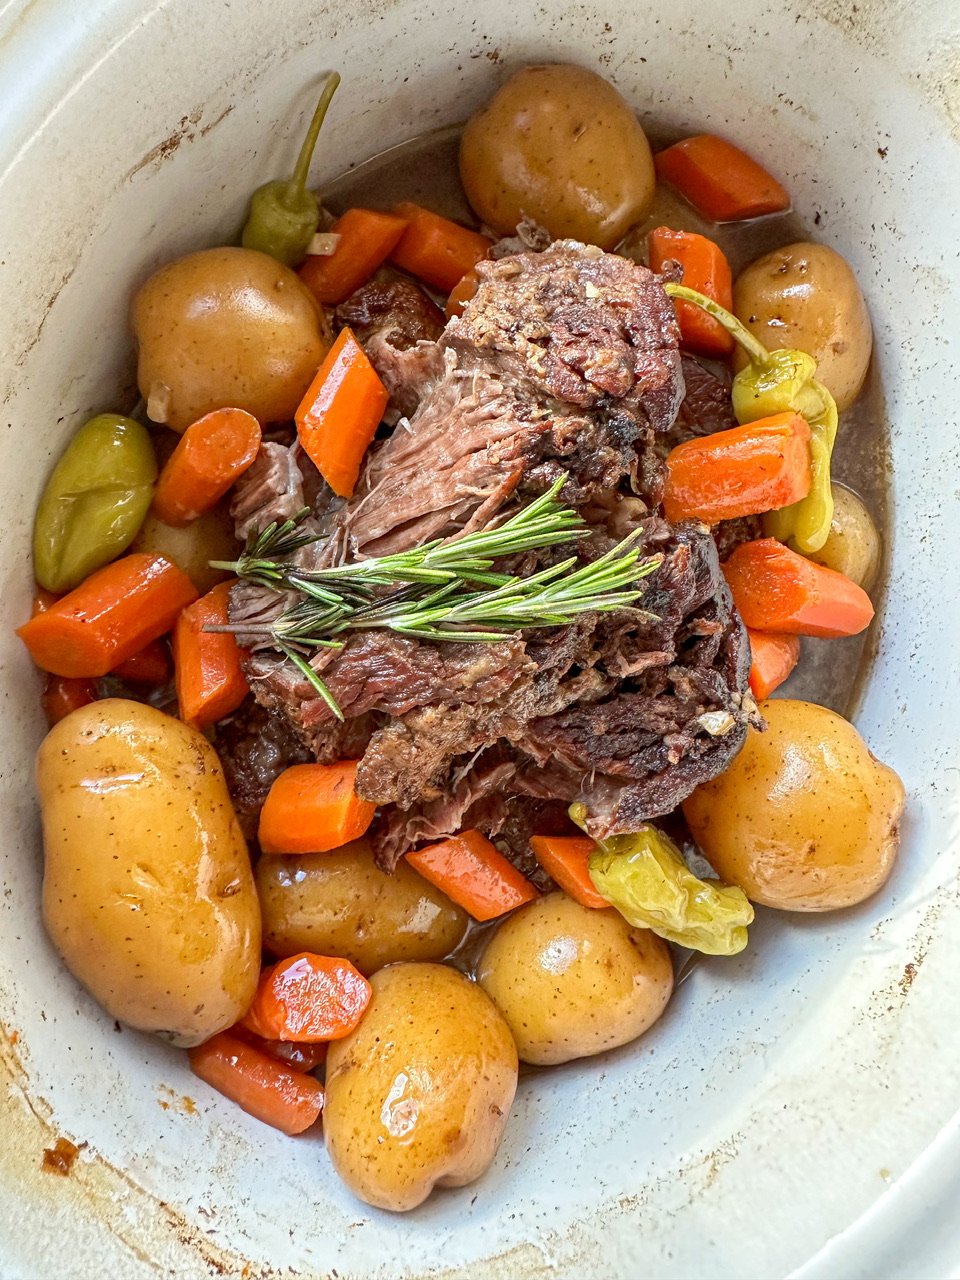 Braised chuck roast made in a slow cooker